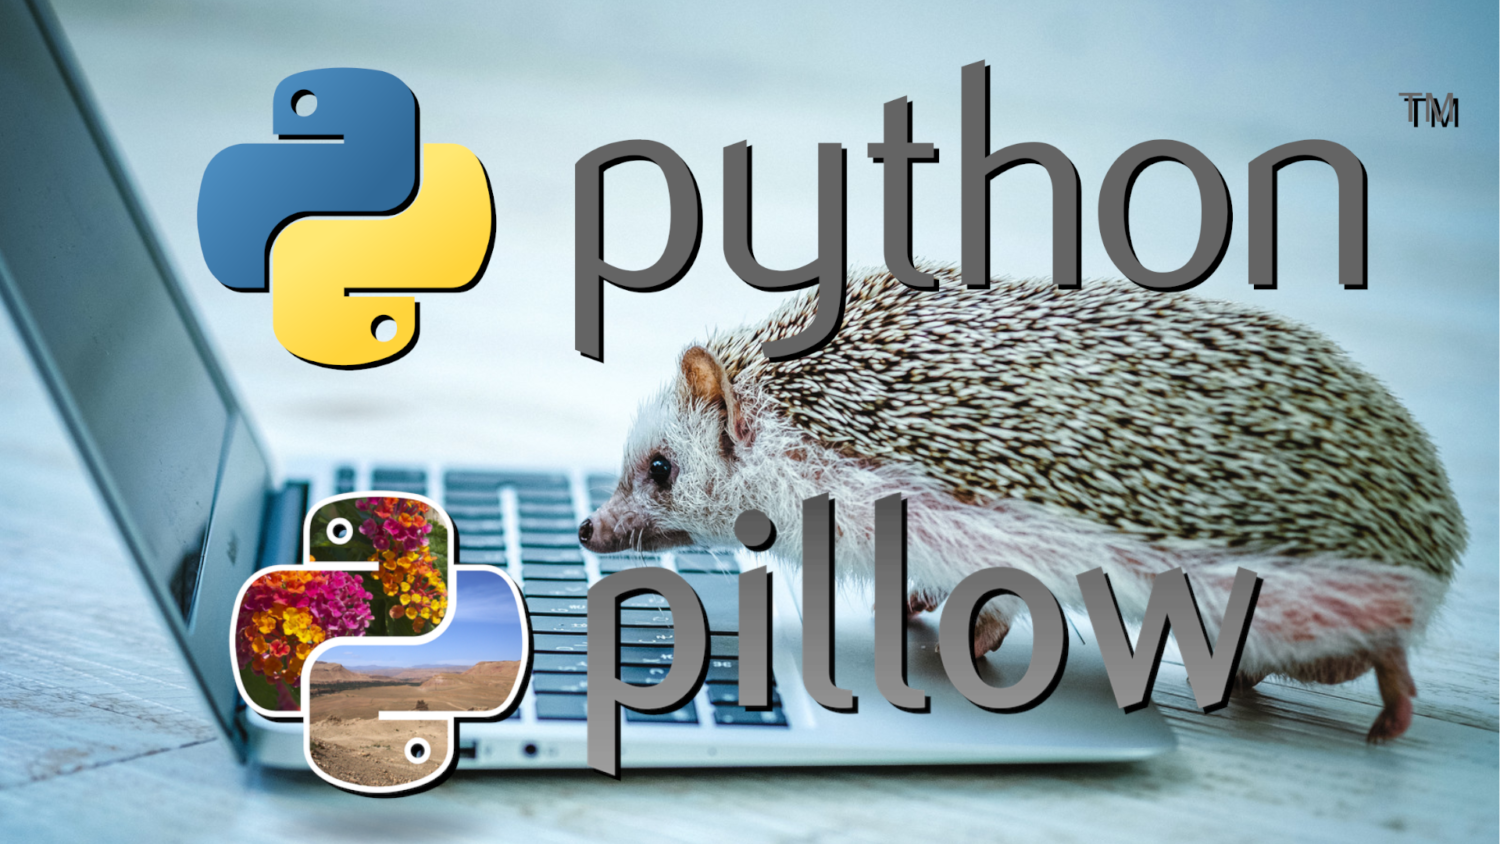 Paste an Image Into a Predefined Area with Python Pillow